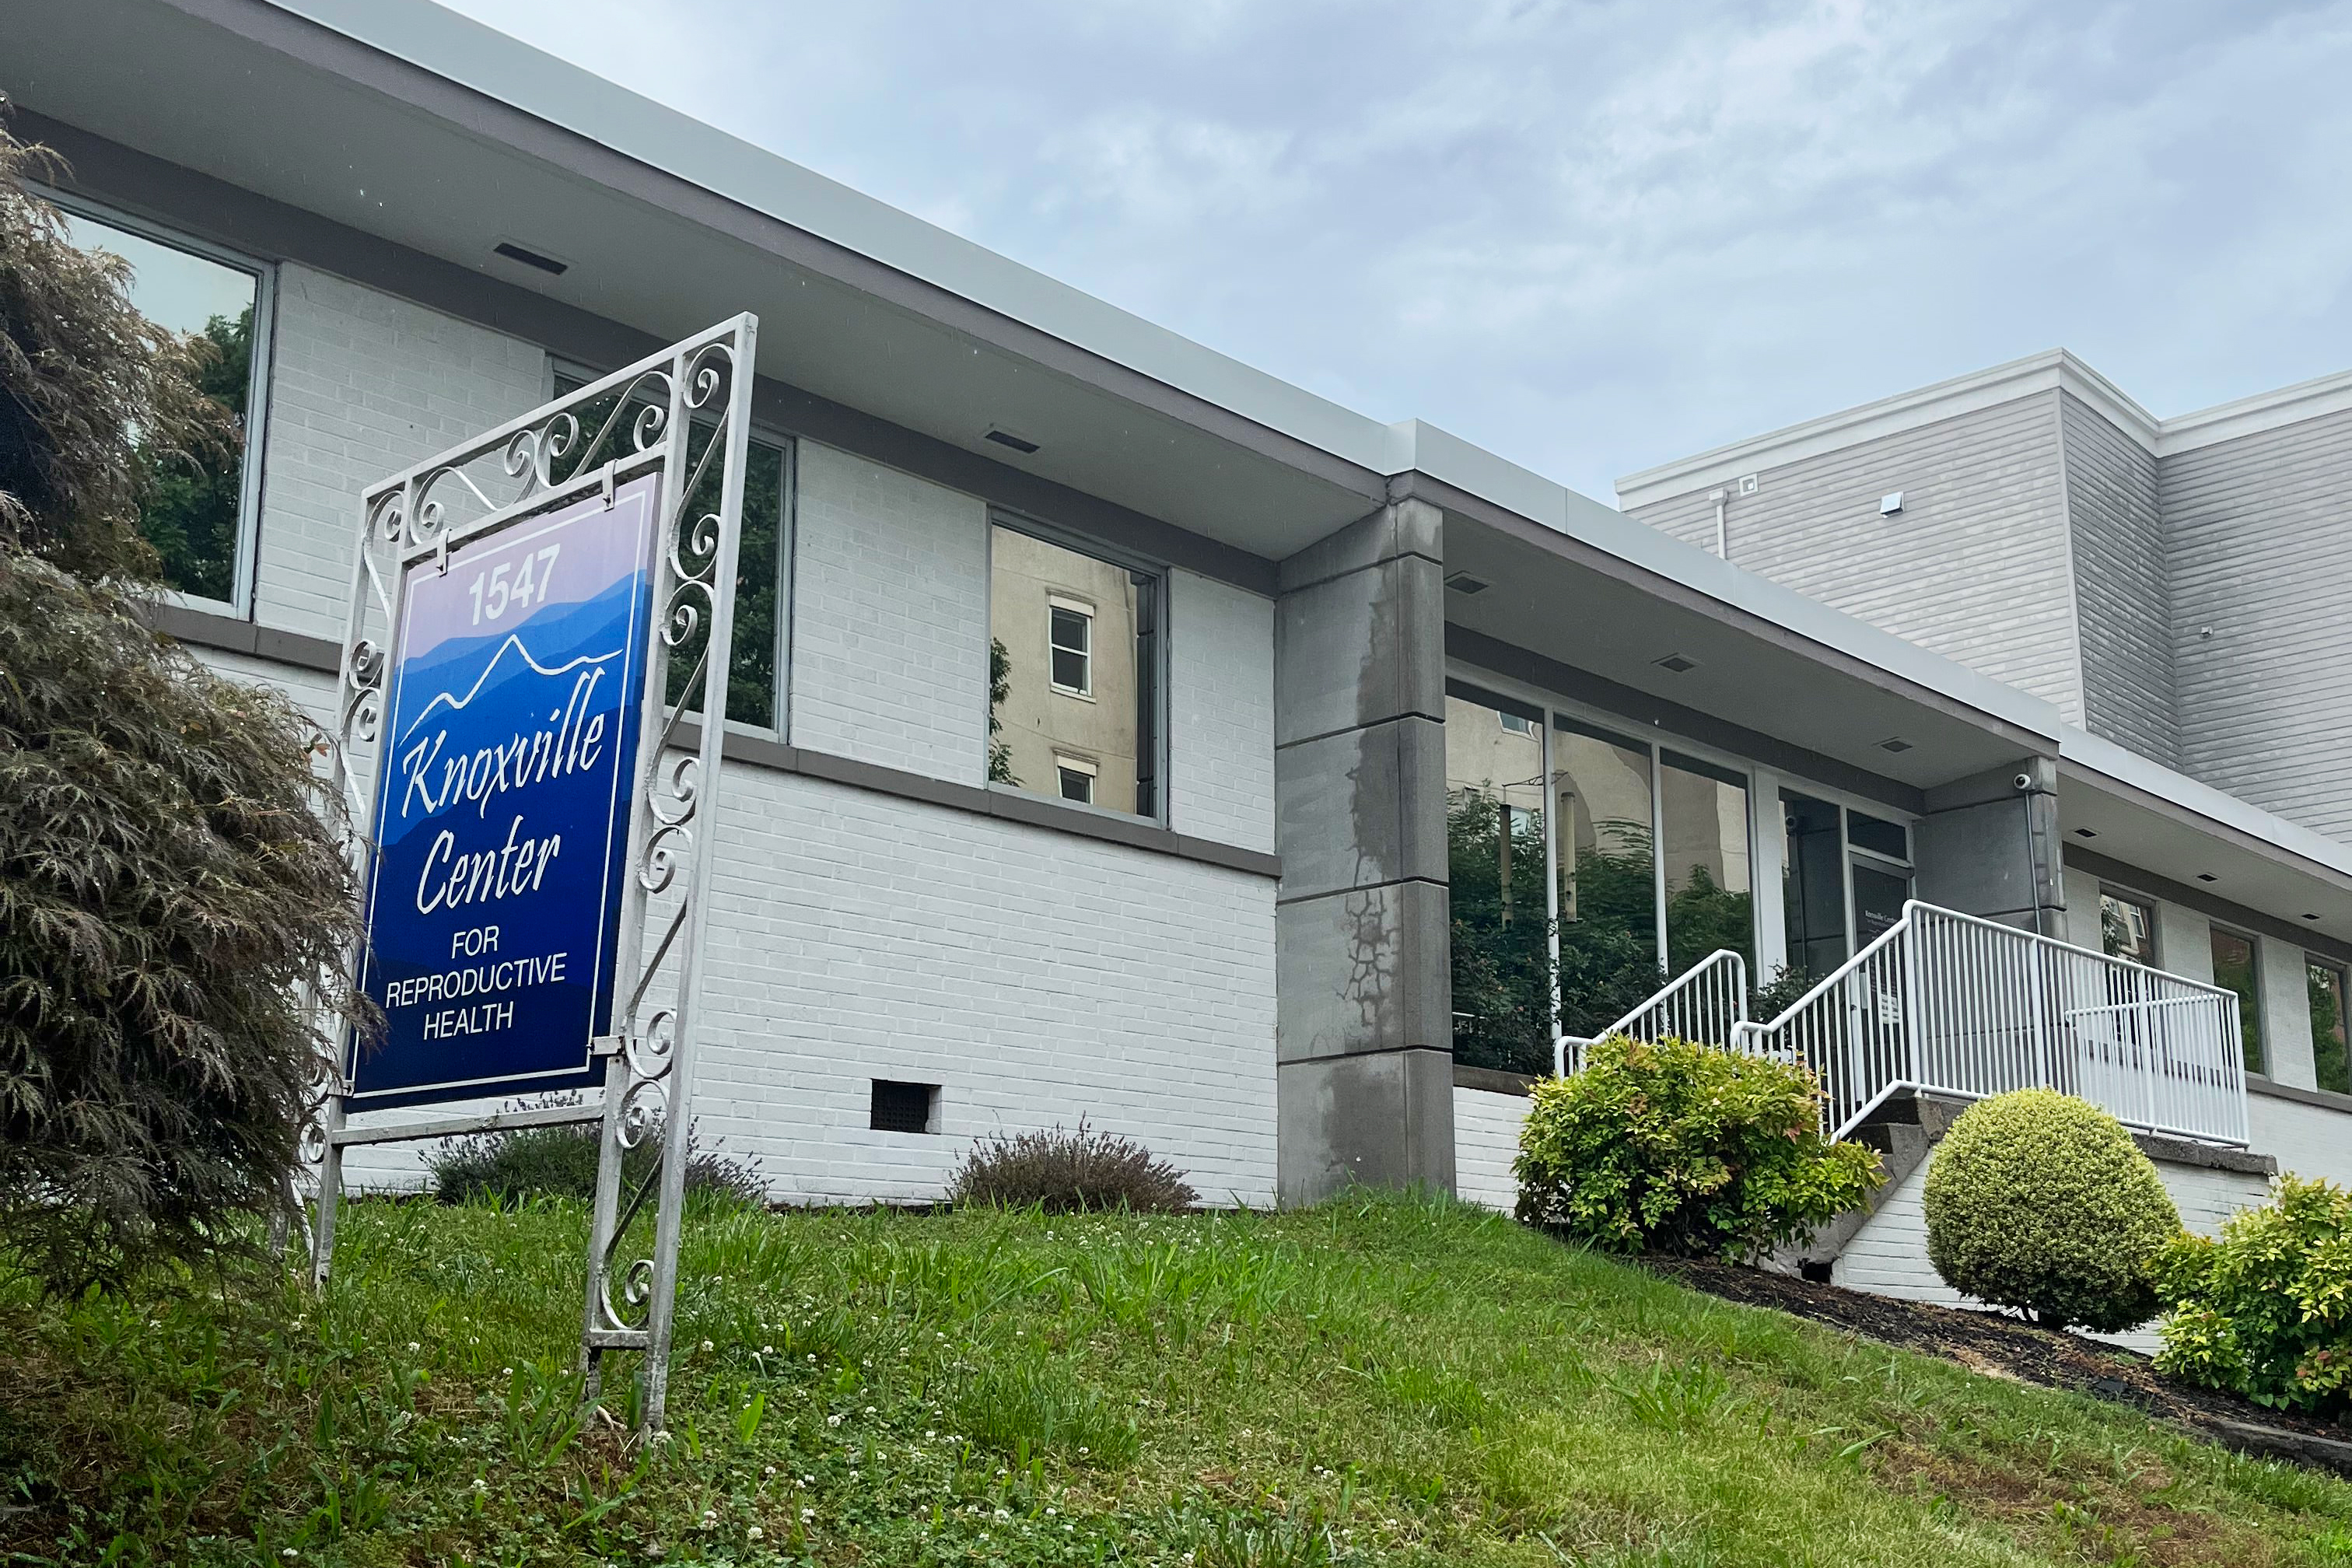 A photo shows the exterior of the Knoxville Center for Reproductive Health. A blue sign to the left of the entryway bears the name of the clinic.